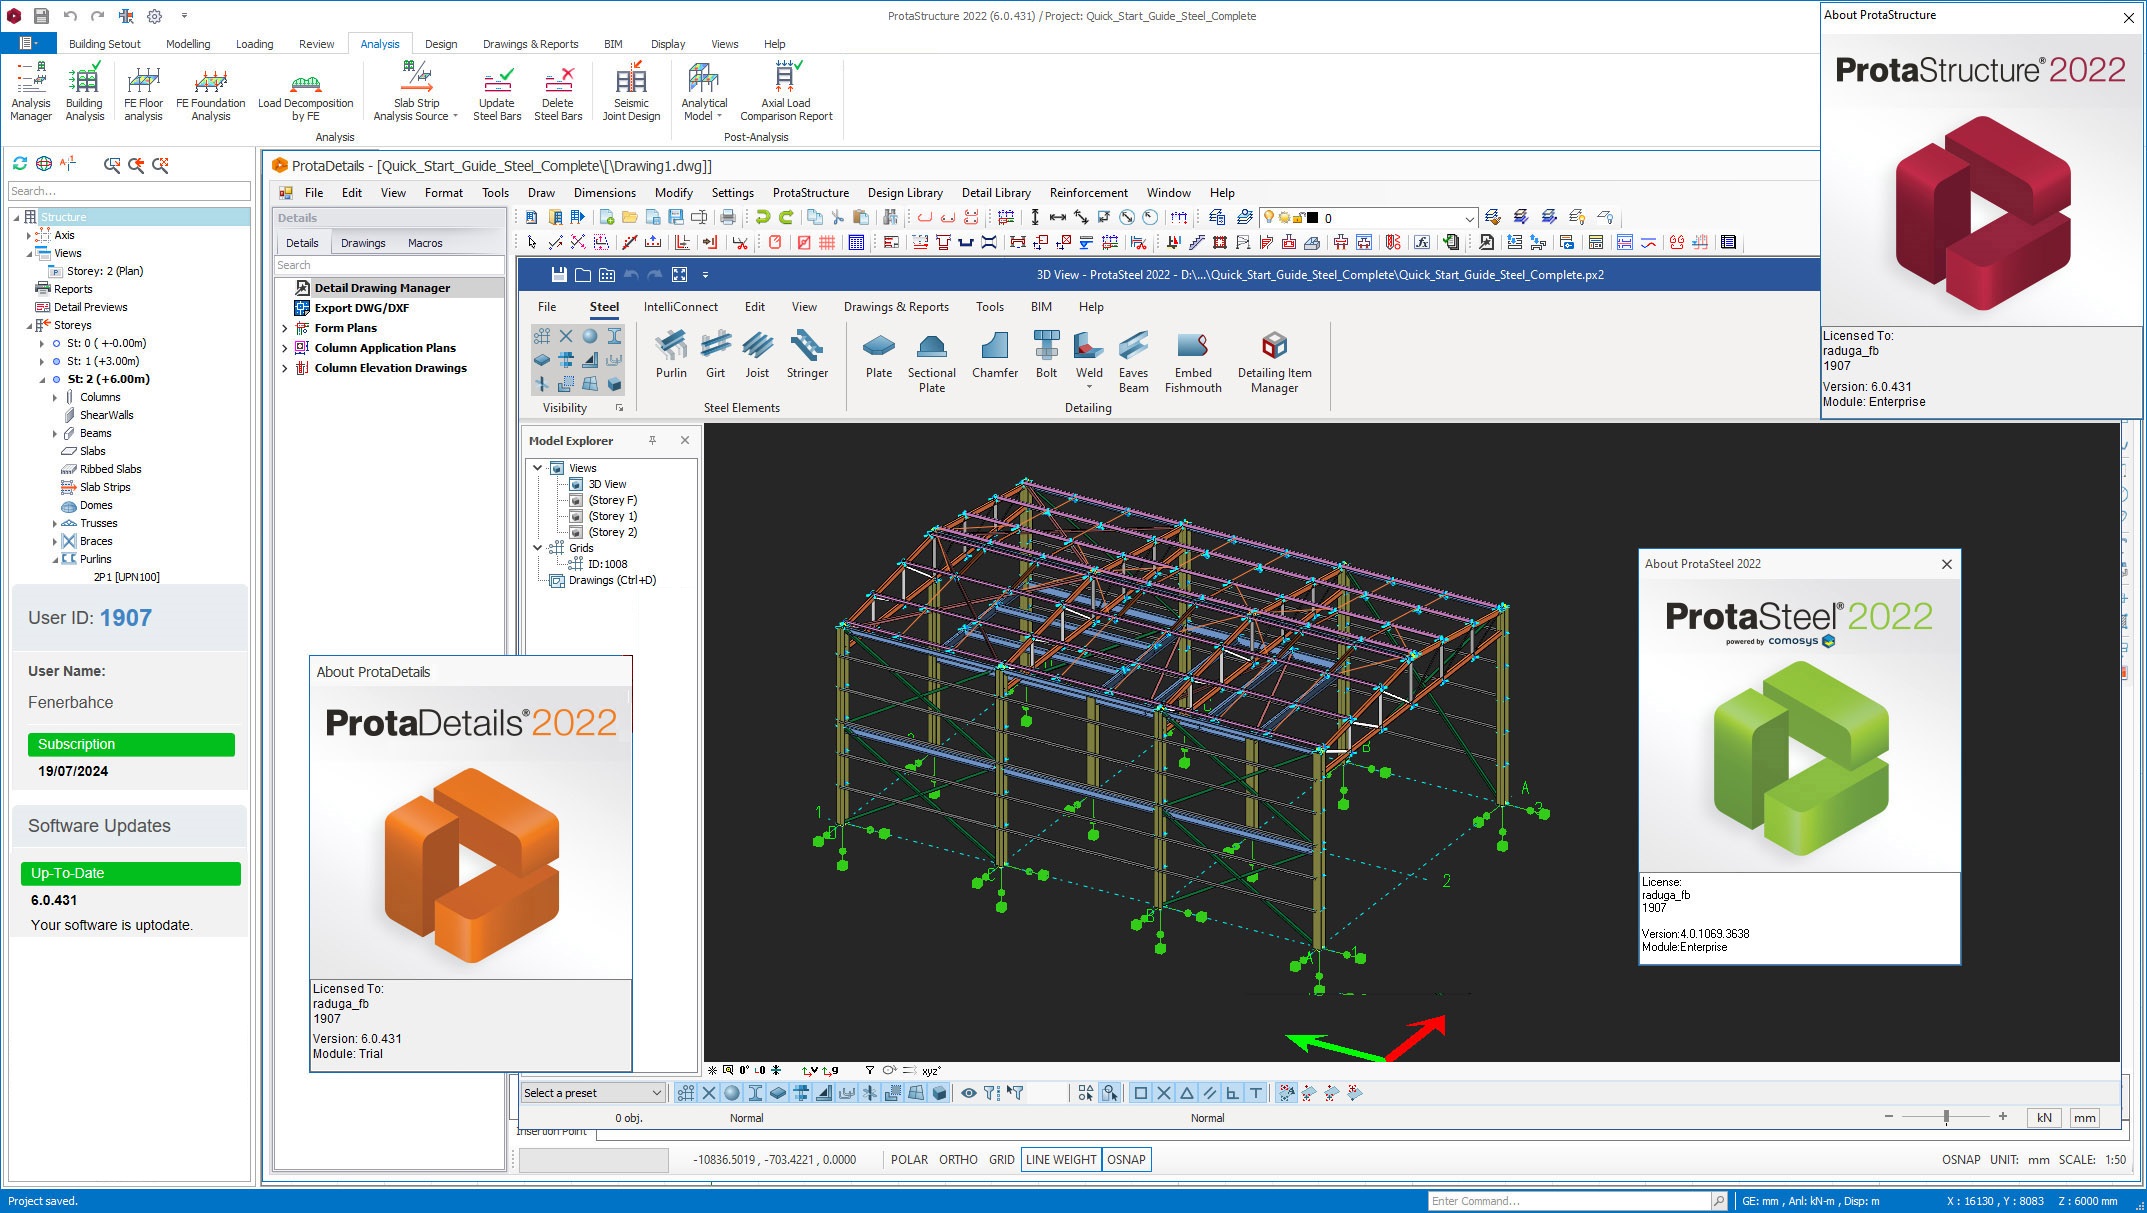 Working with ProtaStructure Suite Enterprise 2022 v6.0.431 full